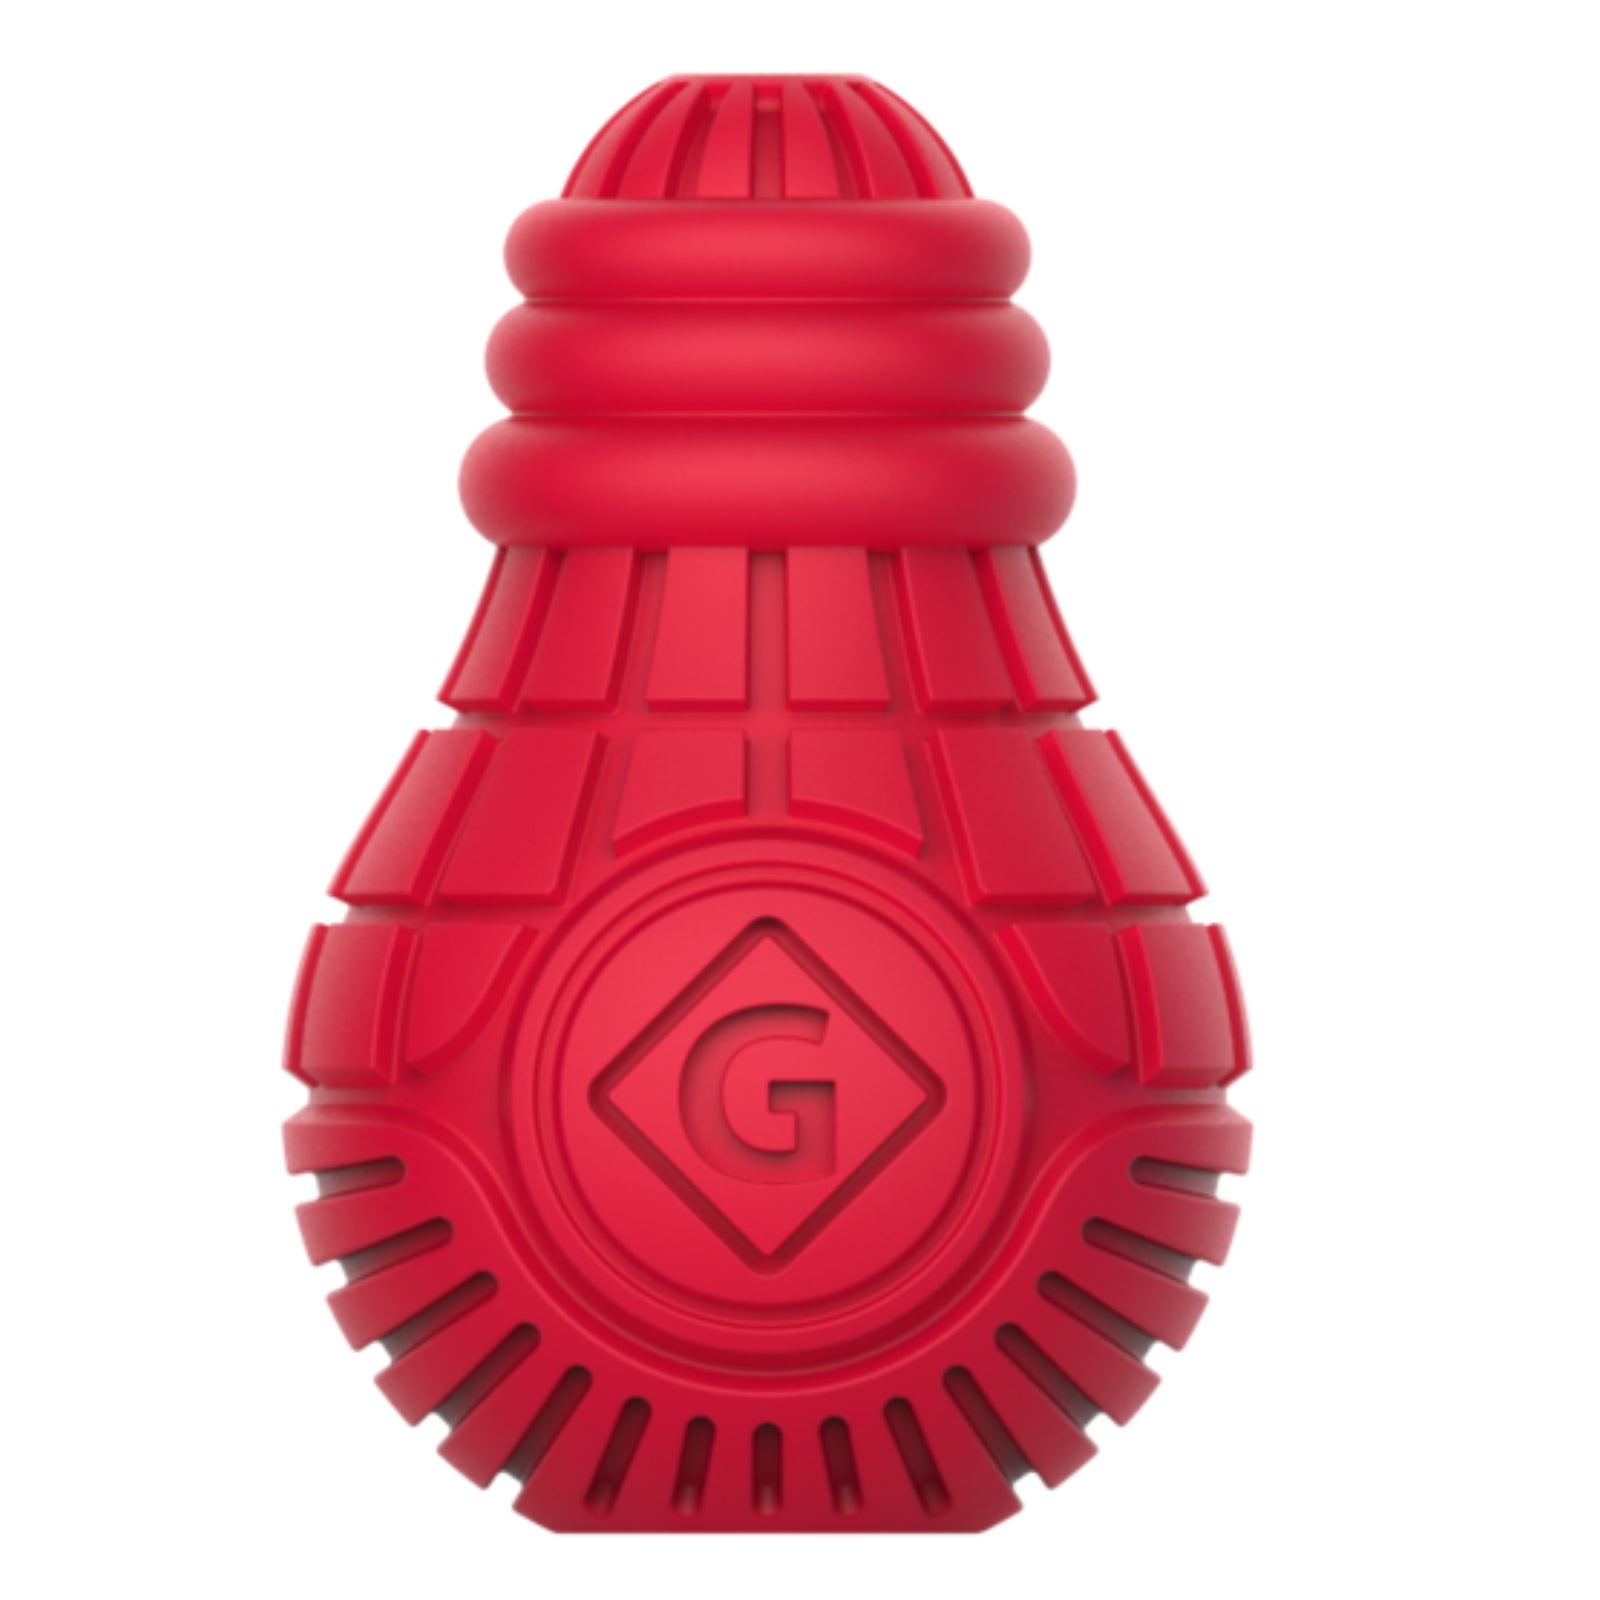 GIGWI Bulb Treat Dispensing Interactive Dog Toy - Colour Red, Size Medium